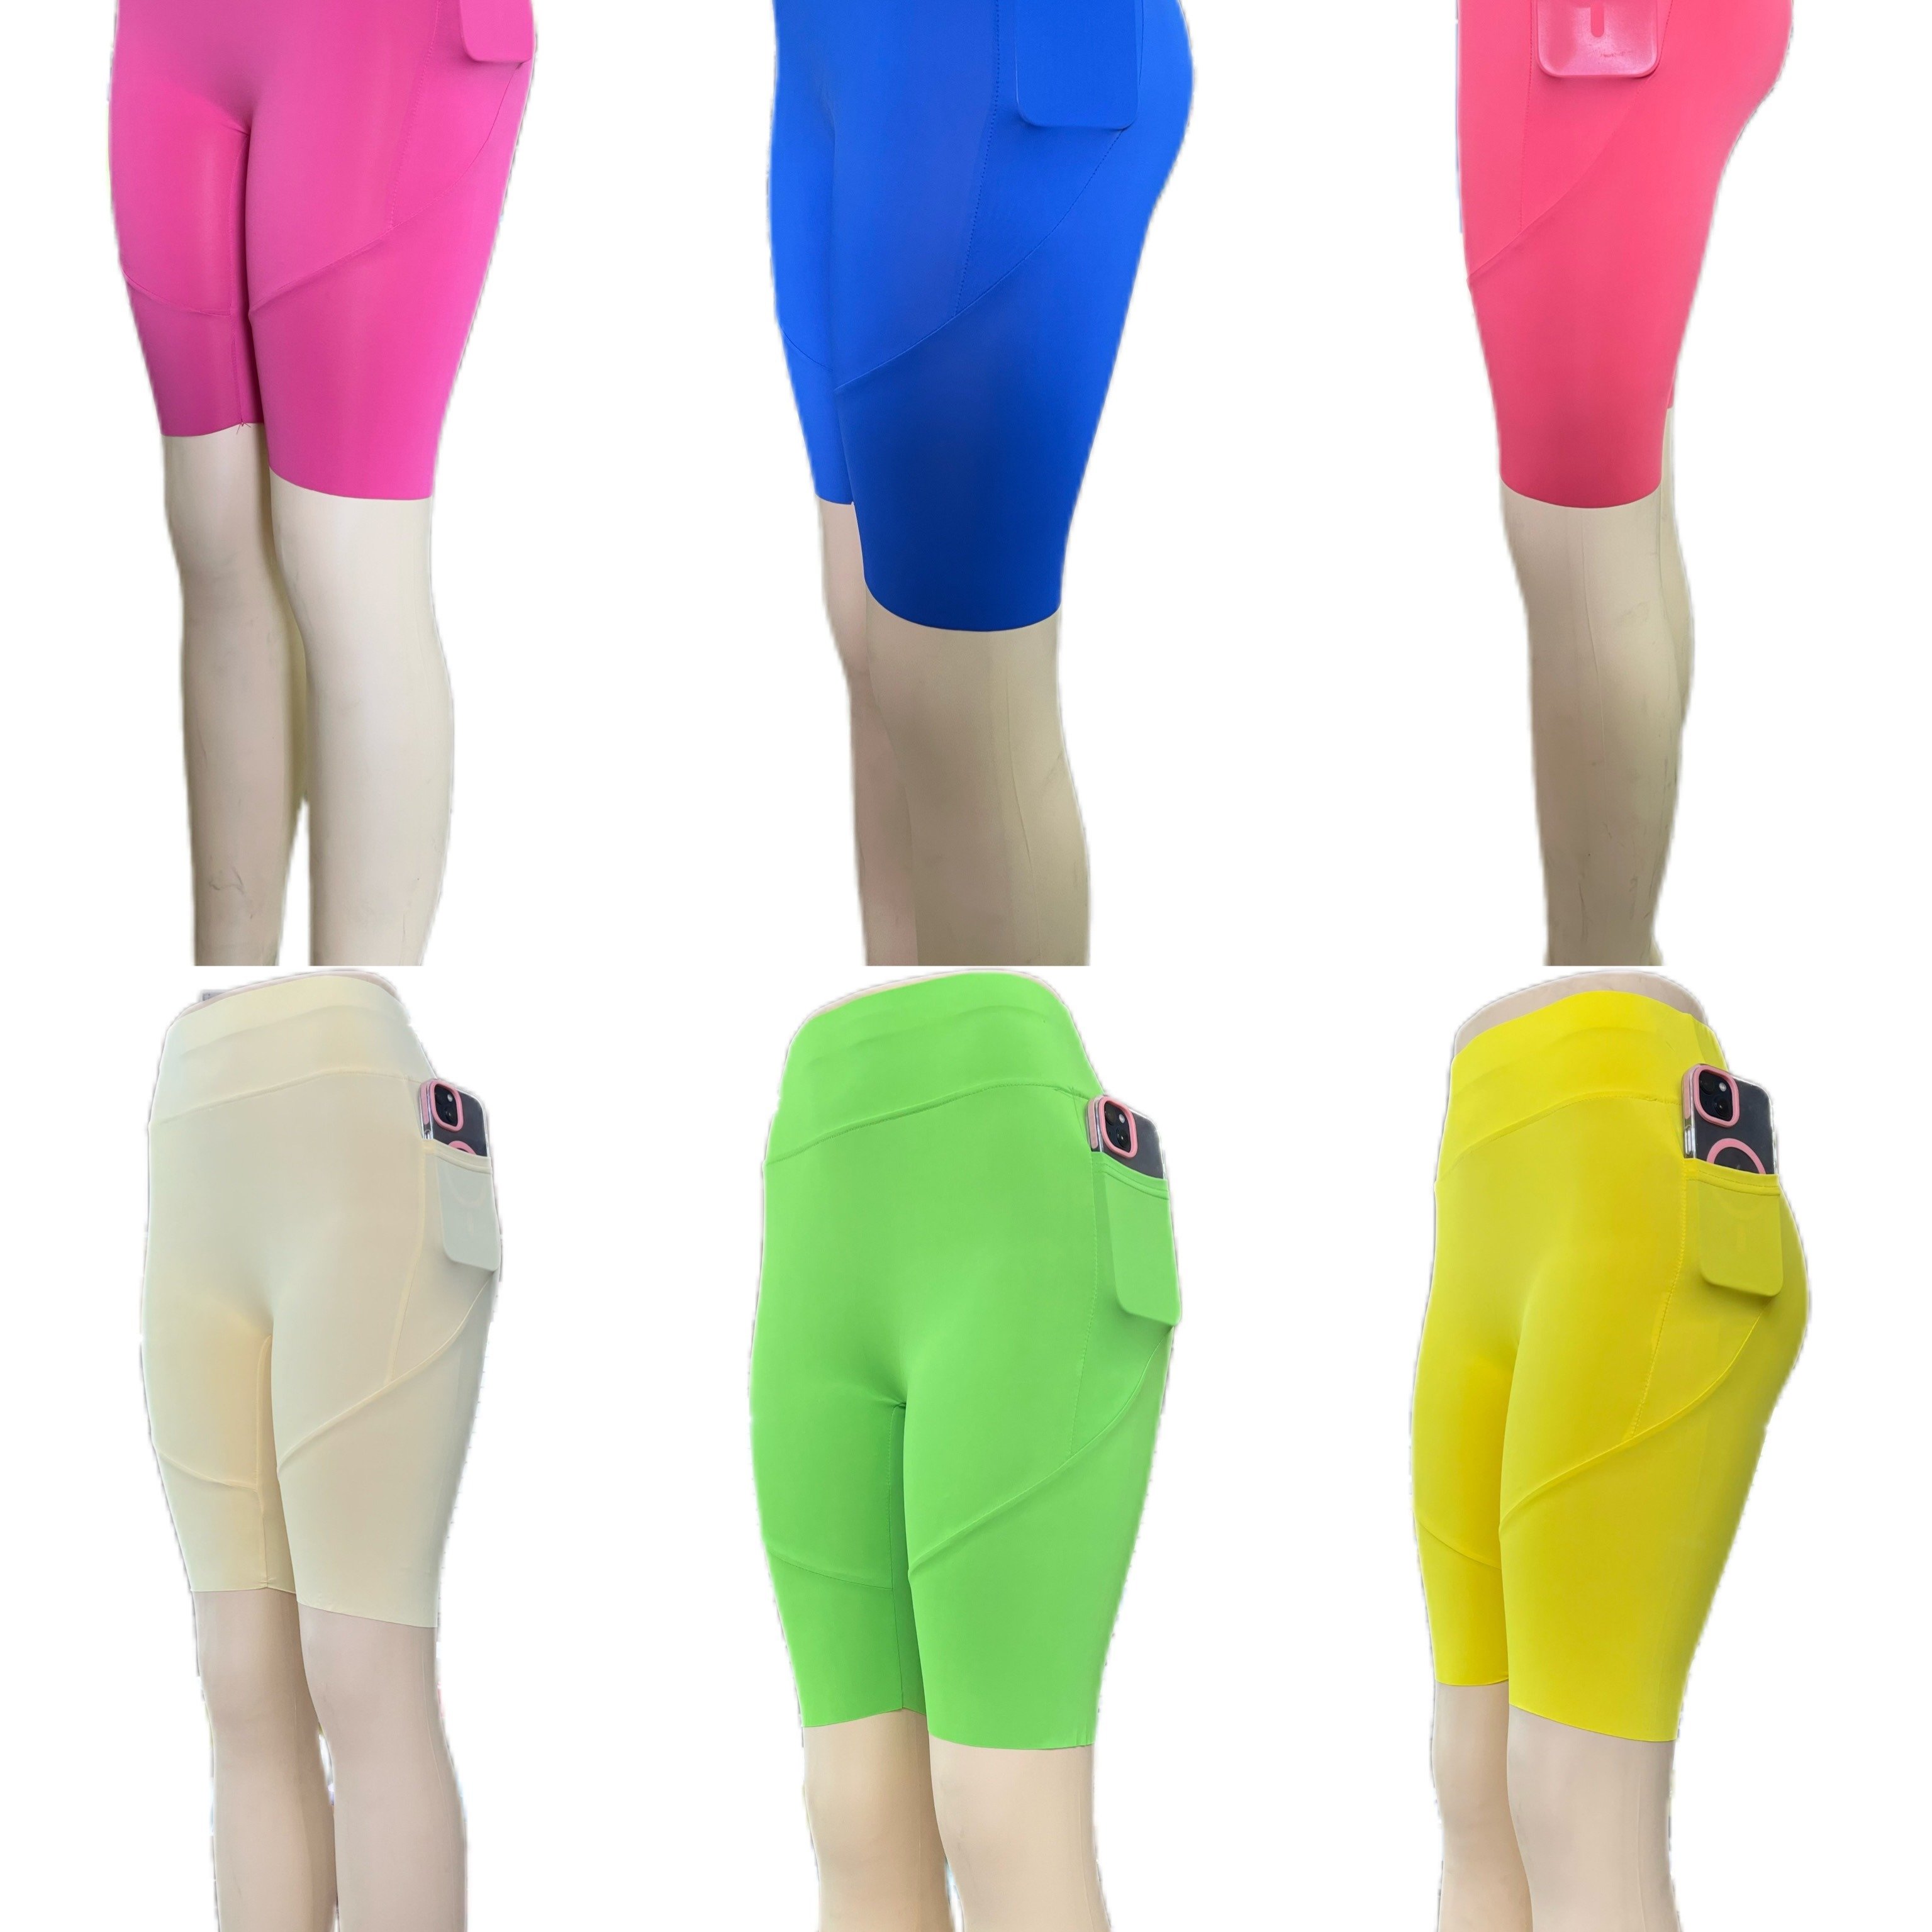 

P23028 Womens High-waist Pocket Yoga Pants - Solid Color Stretch Fitness Leggings - Squat-proof, Breathable Activewear With Secure Pockets For Convenience And Styls